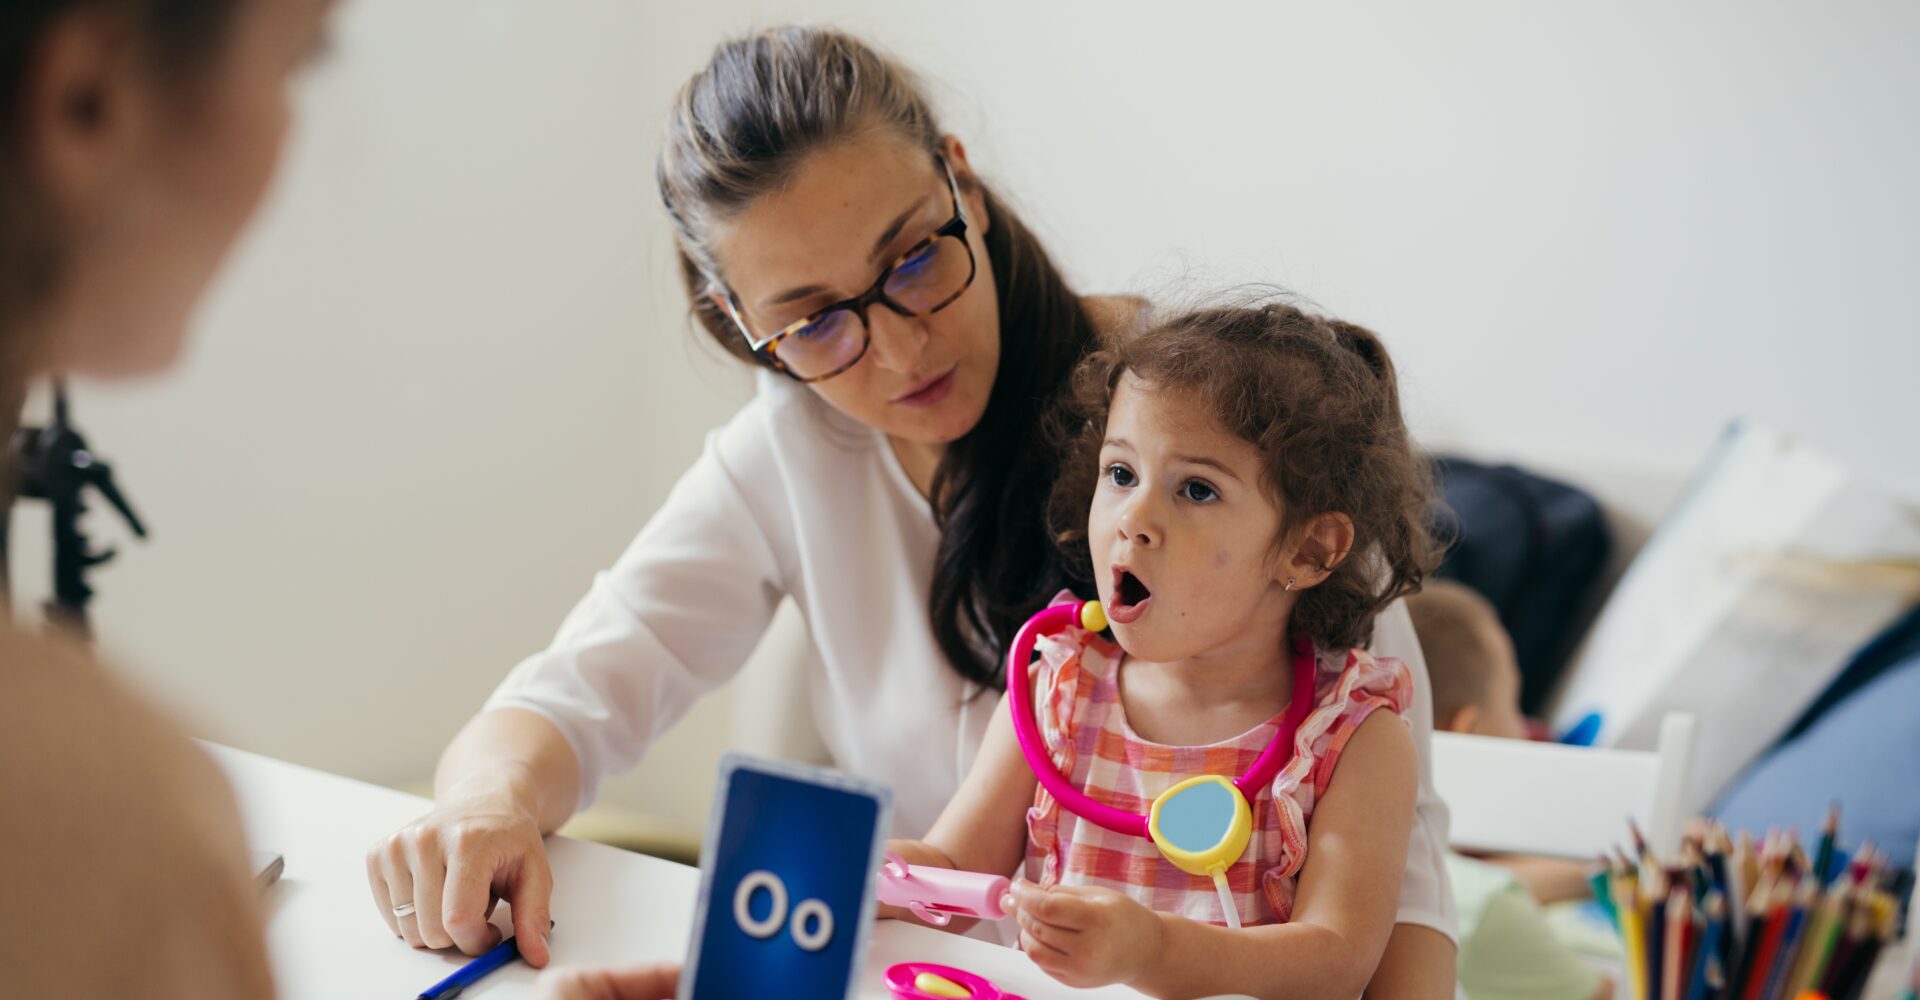 A woman and child are playing with toys.